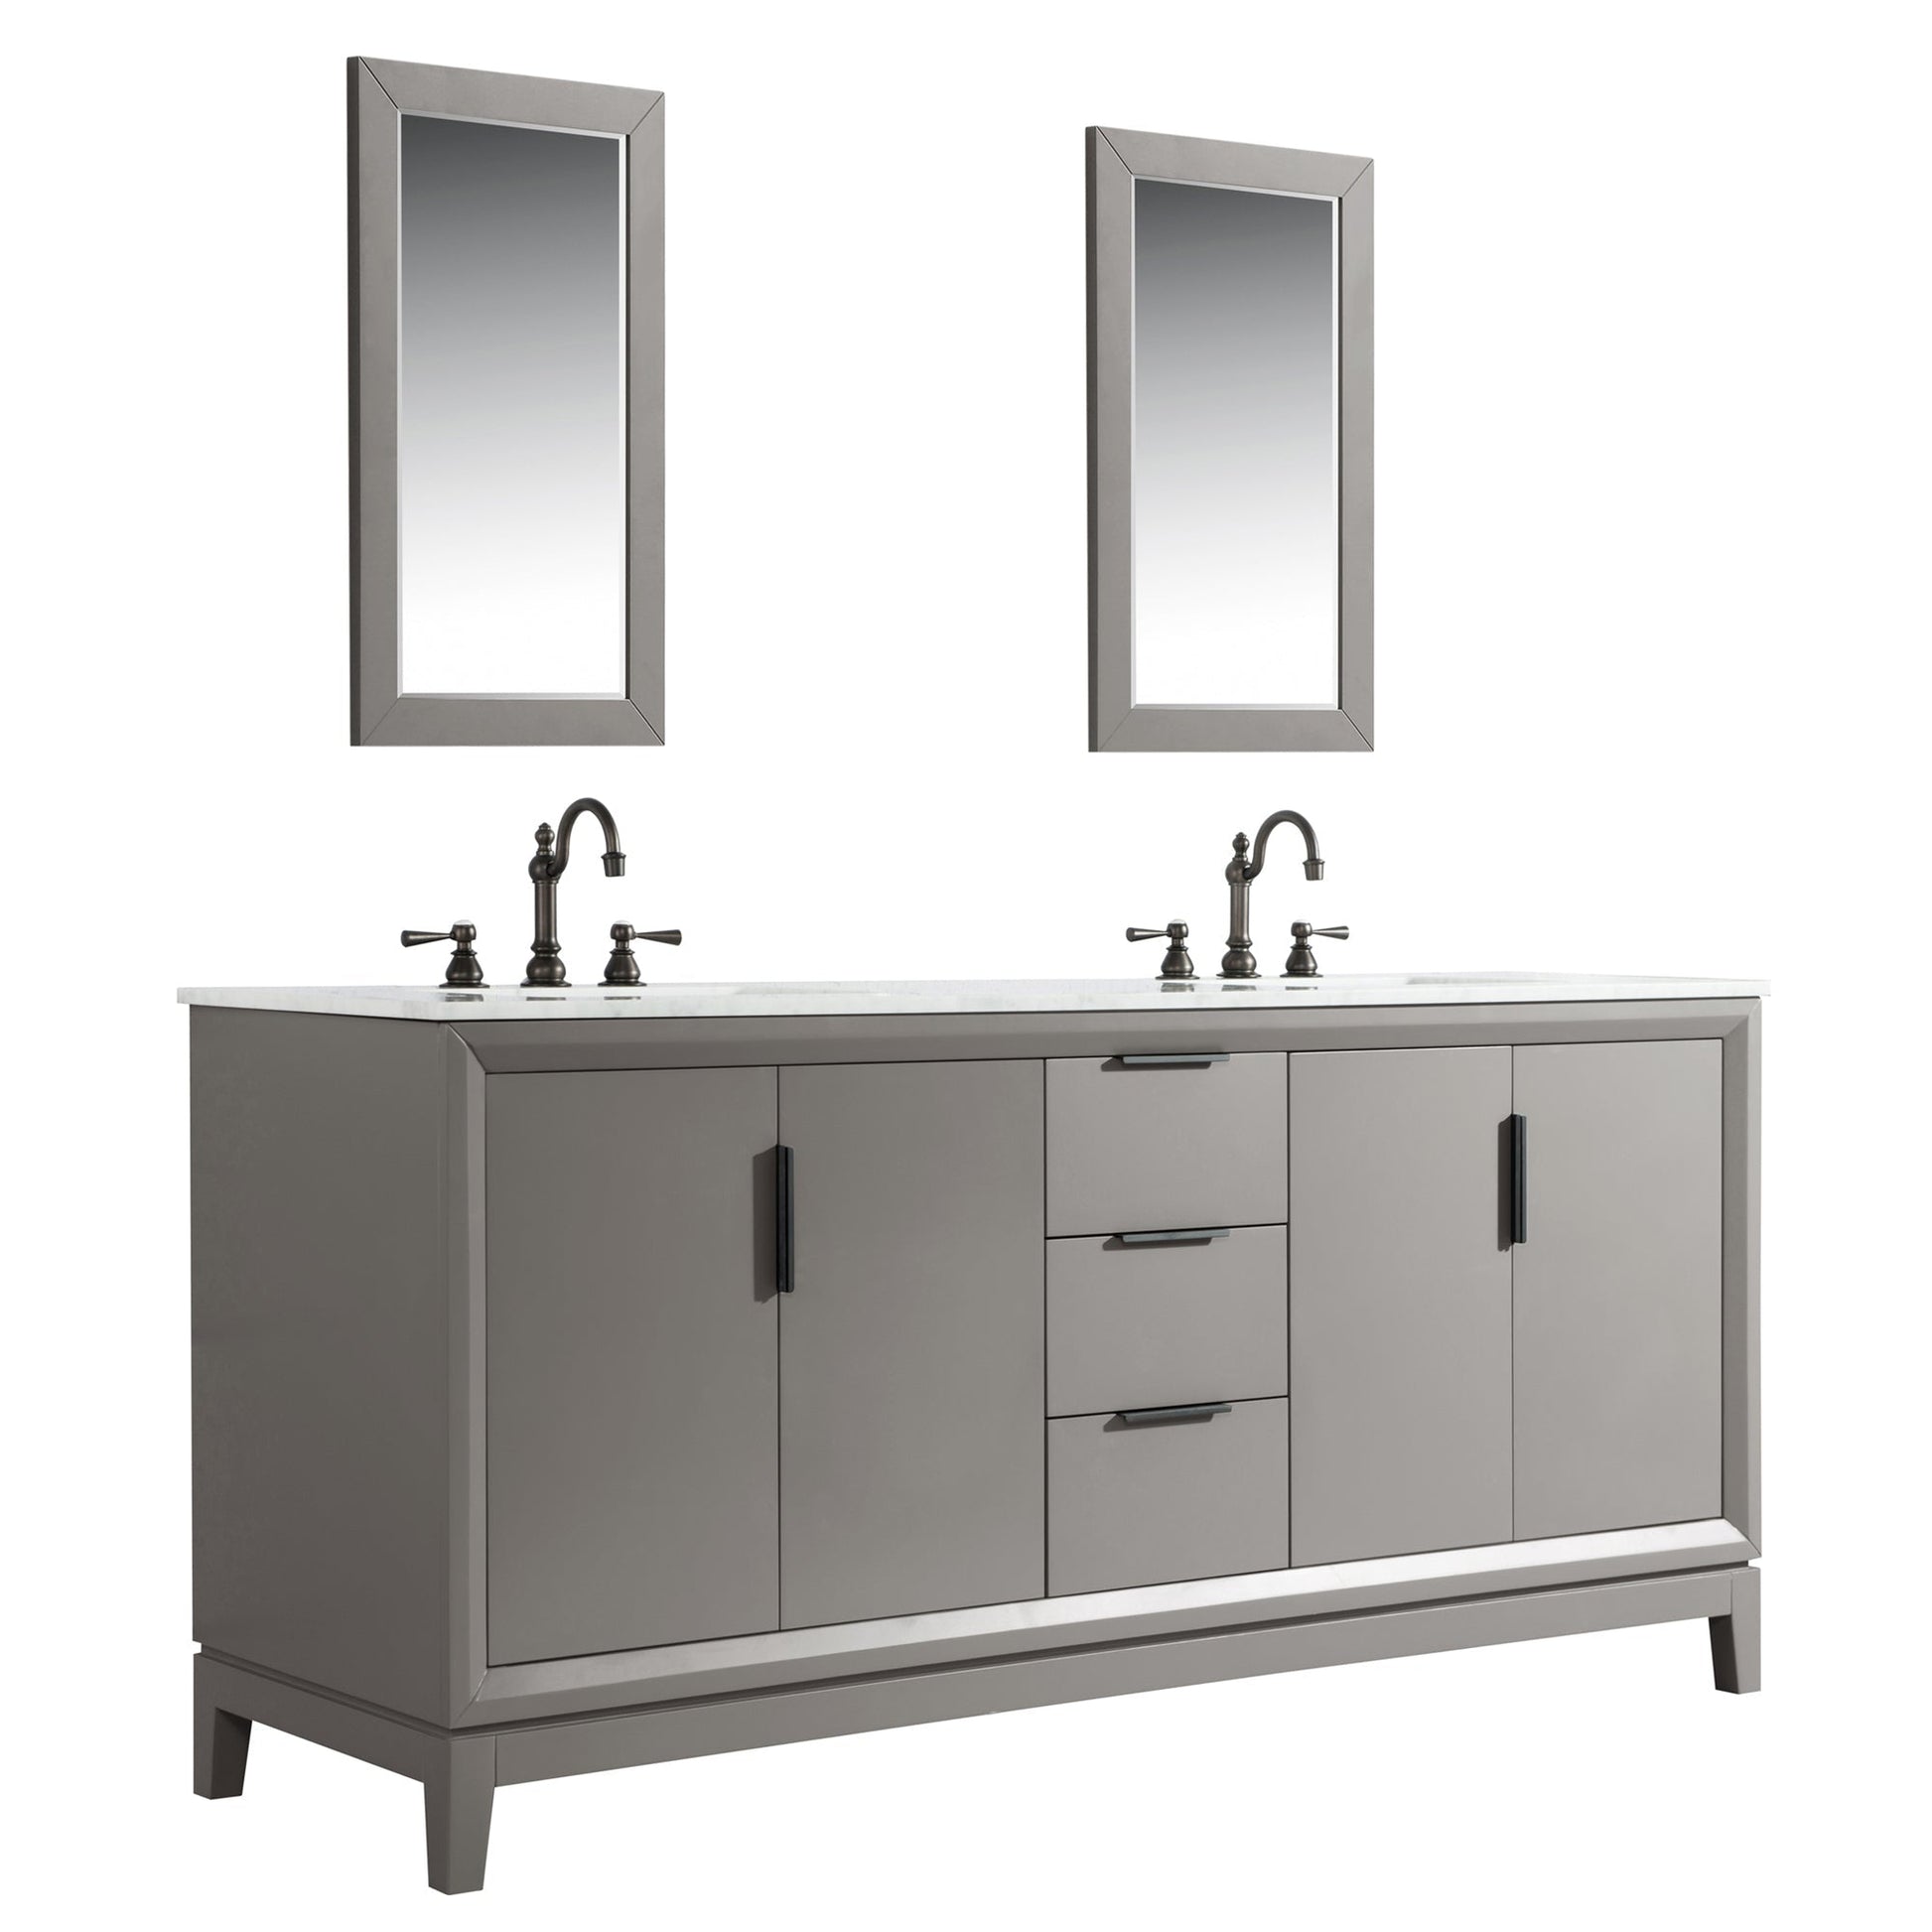 Water Creation Elizabeth 72" Double Sink Carrara White Marble Vanity In Cashmere Grey With Matching Mirror and F2-0012-03-TL Lavatory Faucet